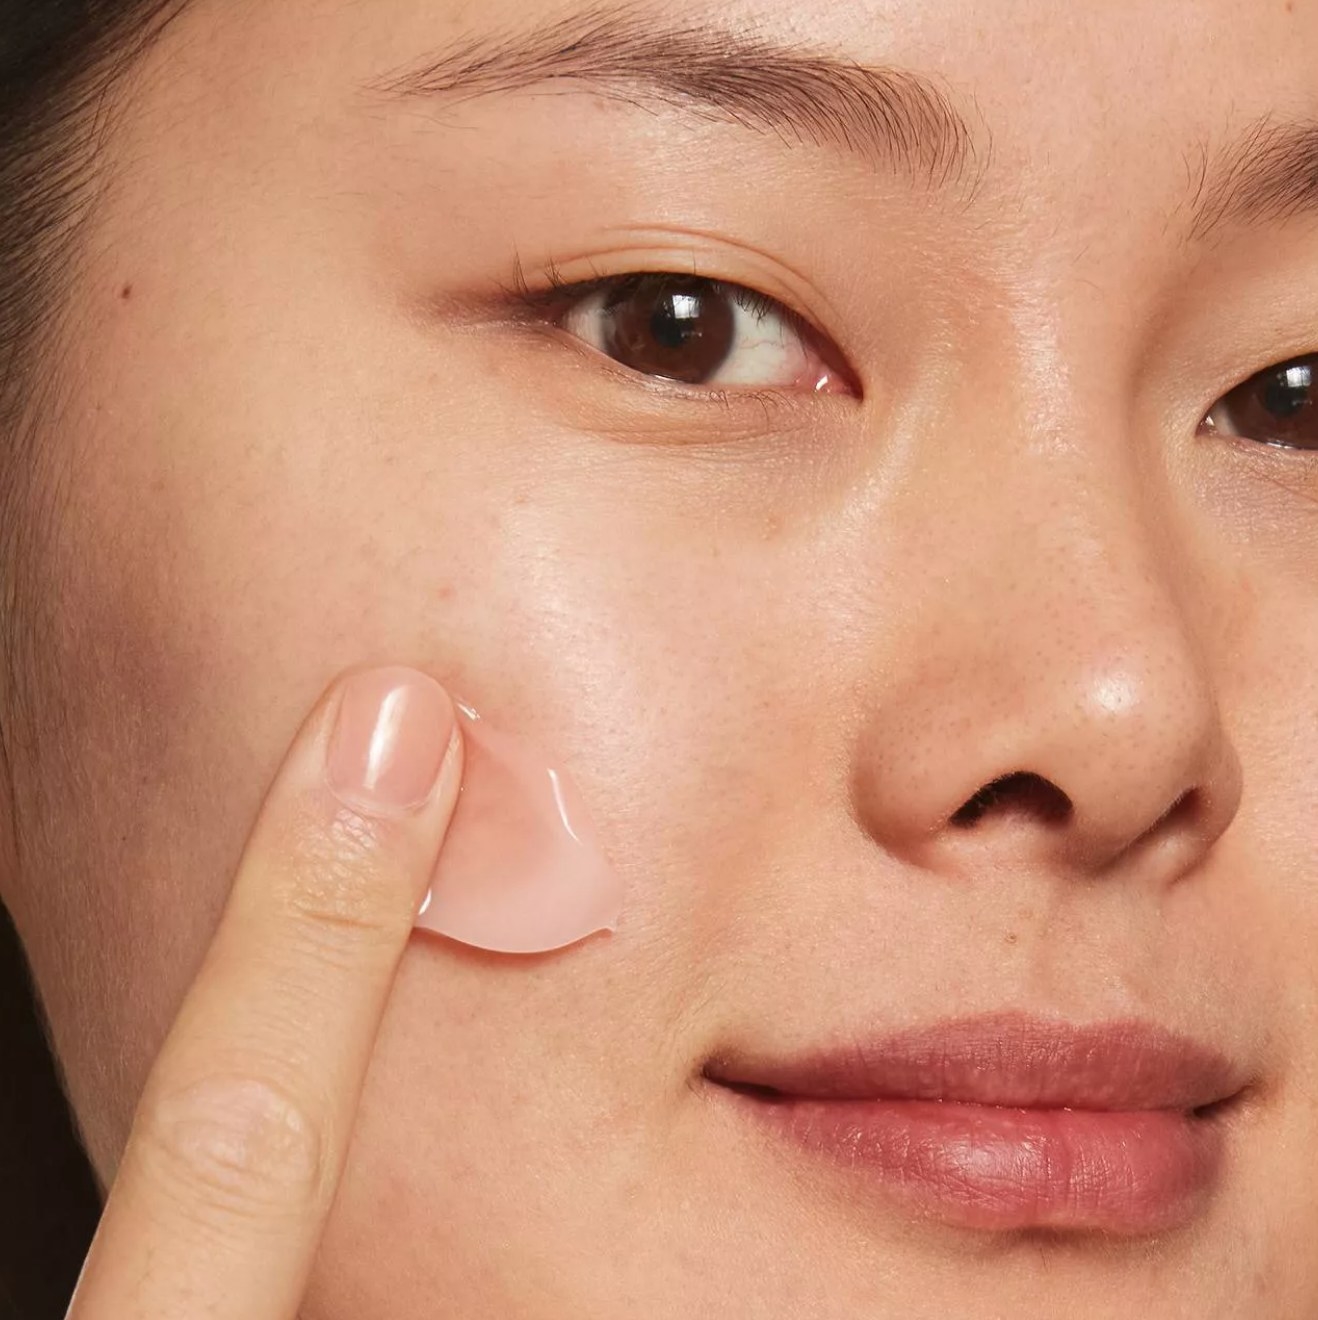 model using one finger to apply the moisturizer on their cheek